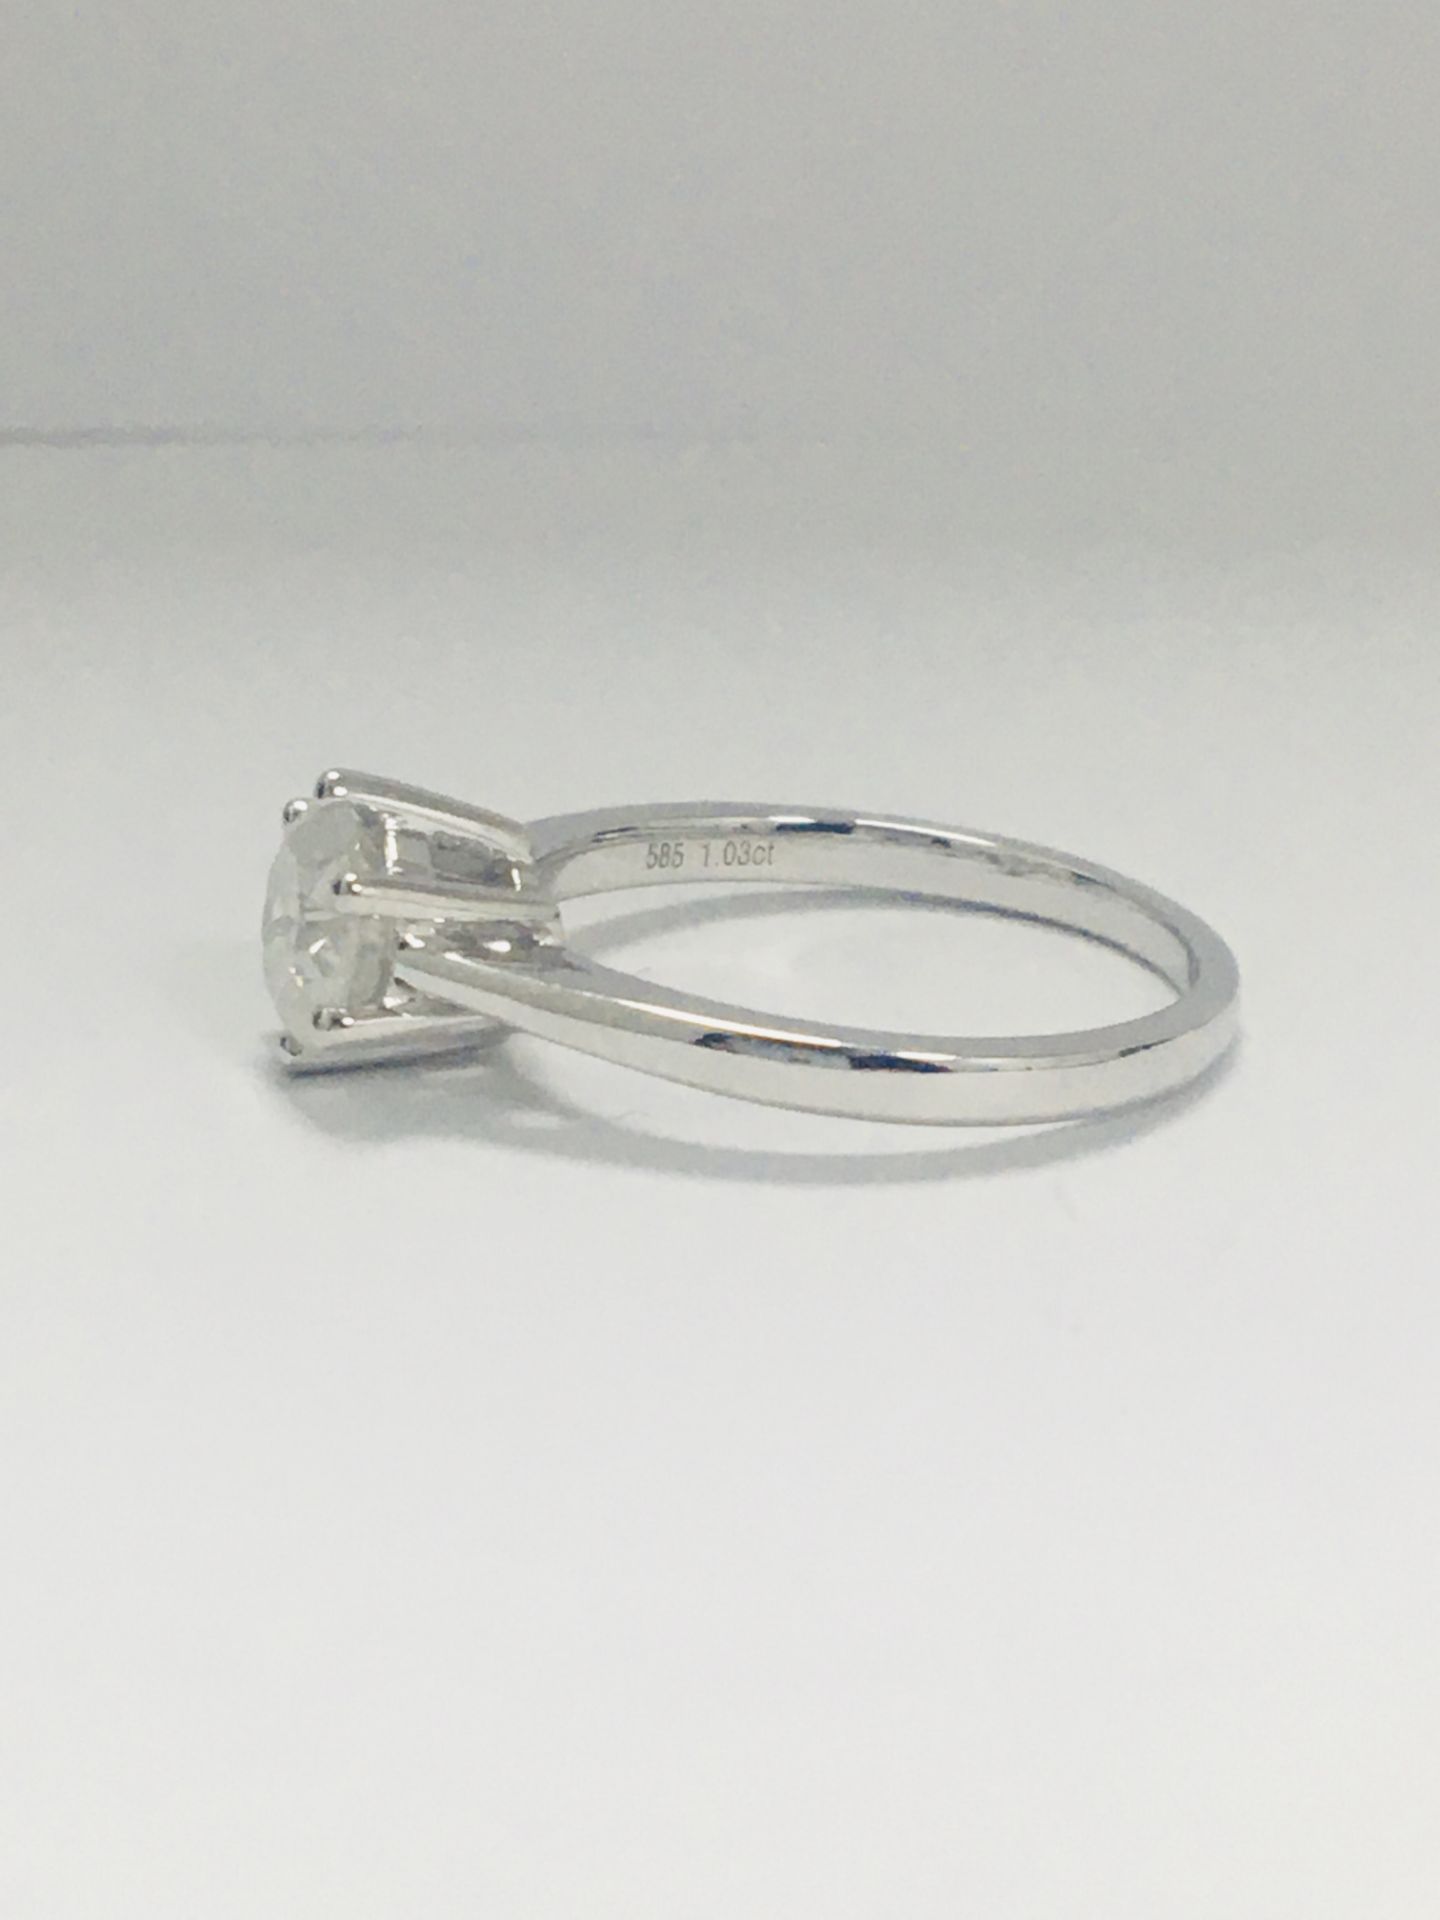 14Ct White Gold Diamond Solitaire Ring - Image 3 of 10